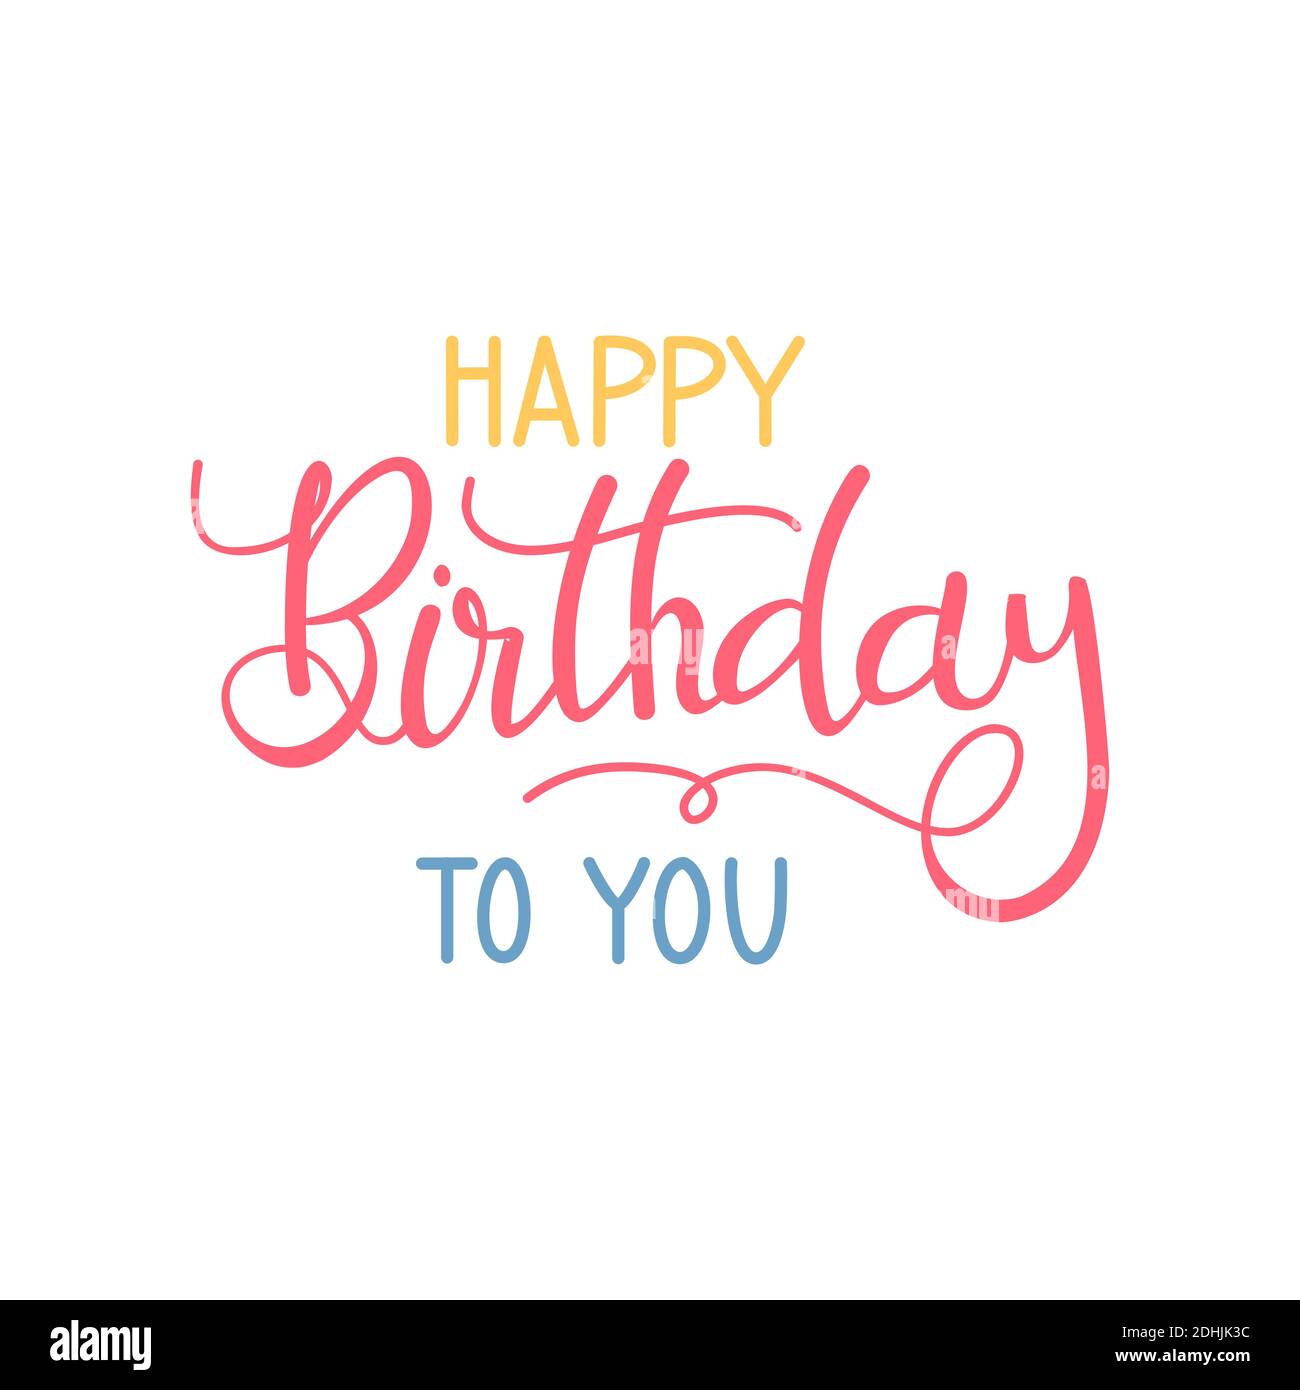 Happy birthday to you vector text on texture background. Lettering for invitation, wedding and greeting card, prints and posters. Hand drawn inscripti Stock Vector